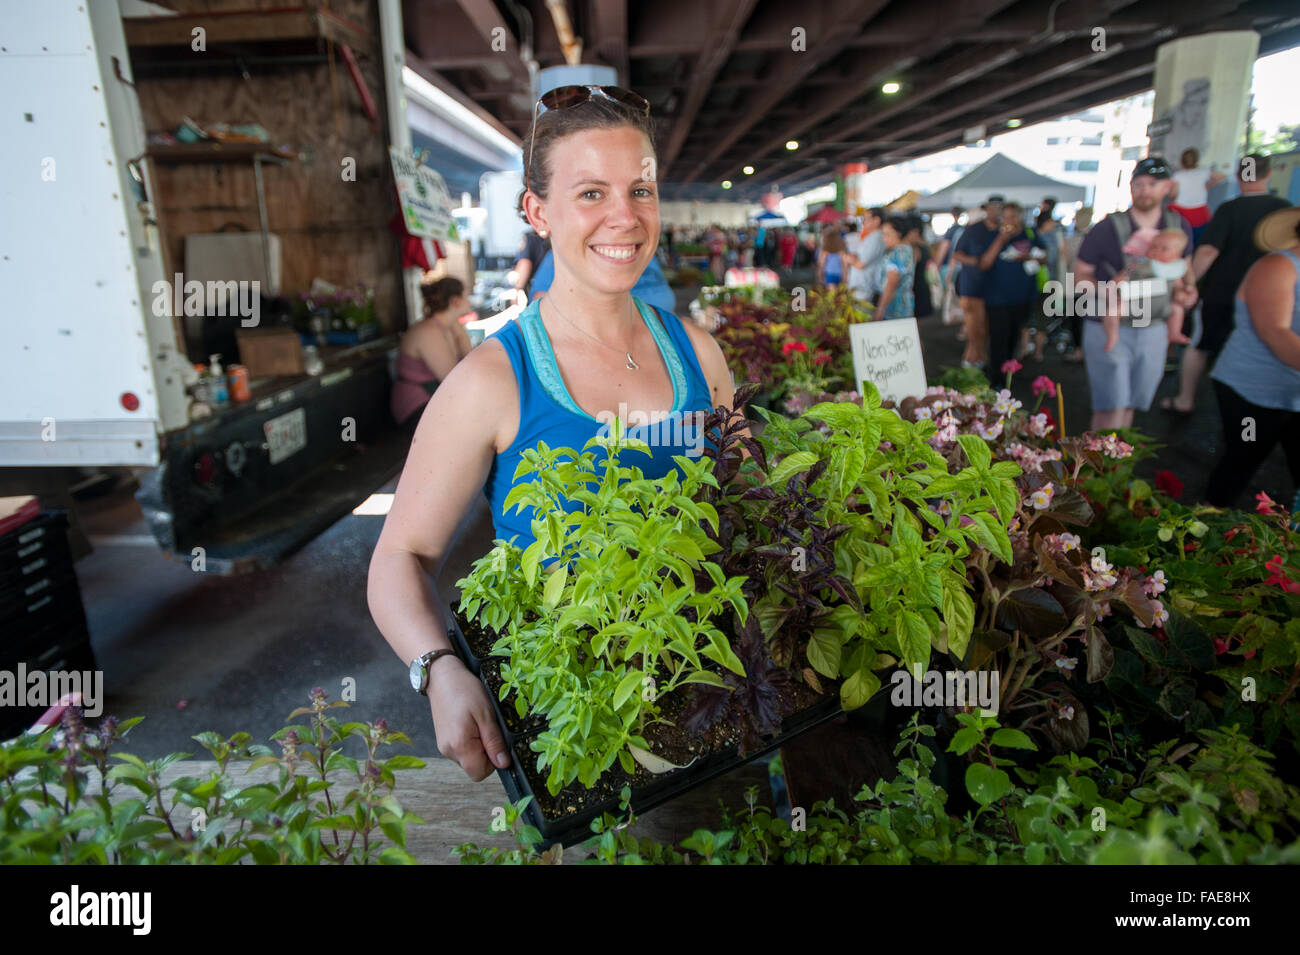 Woman selling plants at a local farmers market Stock Photo